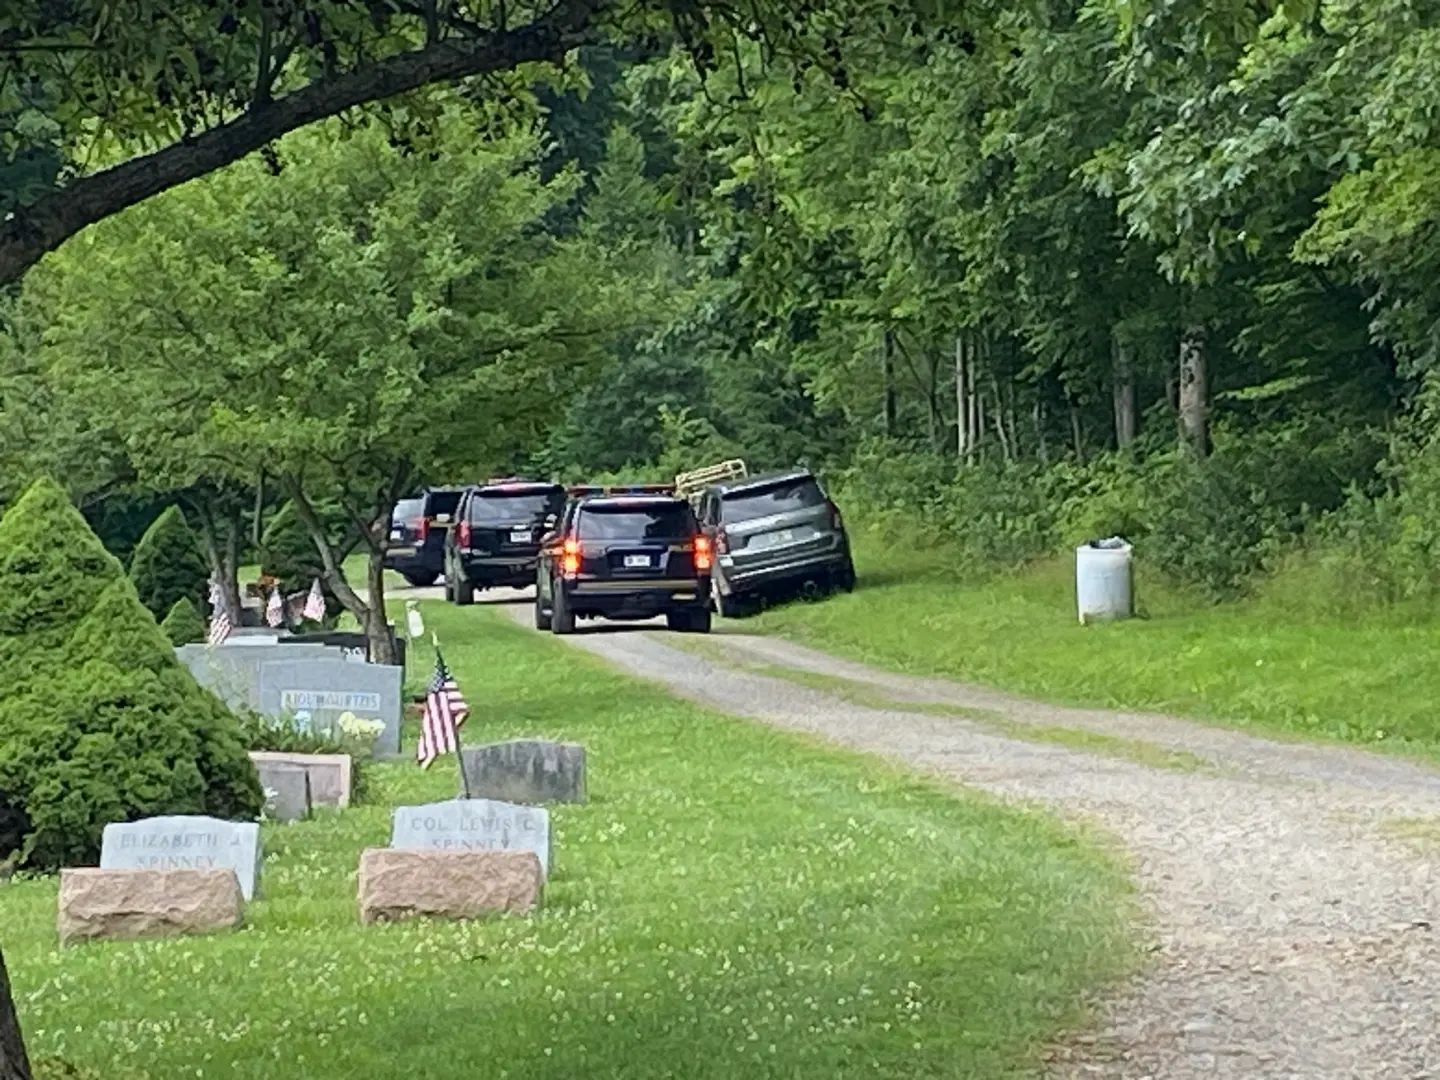 Search Crews Seen in Cemetery; Drone Reported Near Jail Before Michael Burham's Escape; Troopers Have Reason to Believe He is Armed